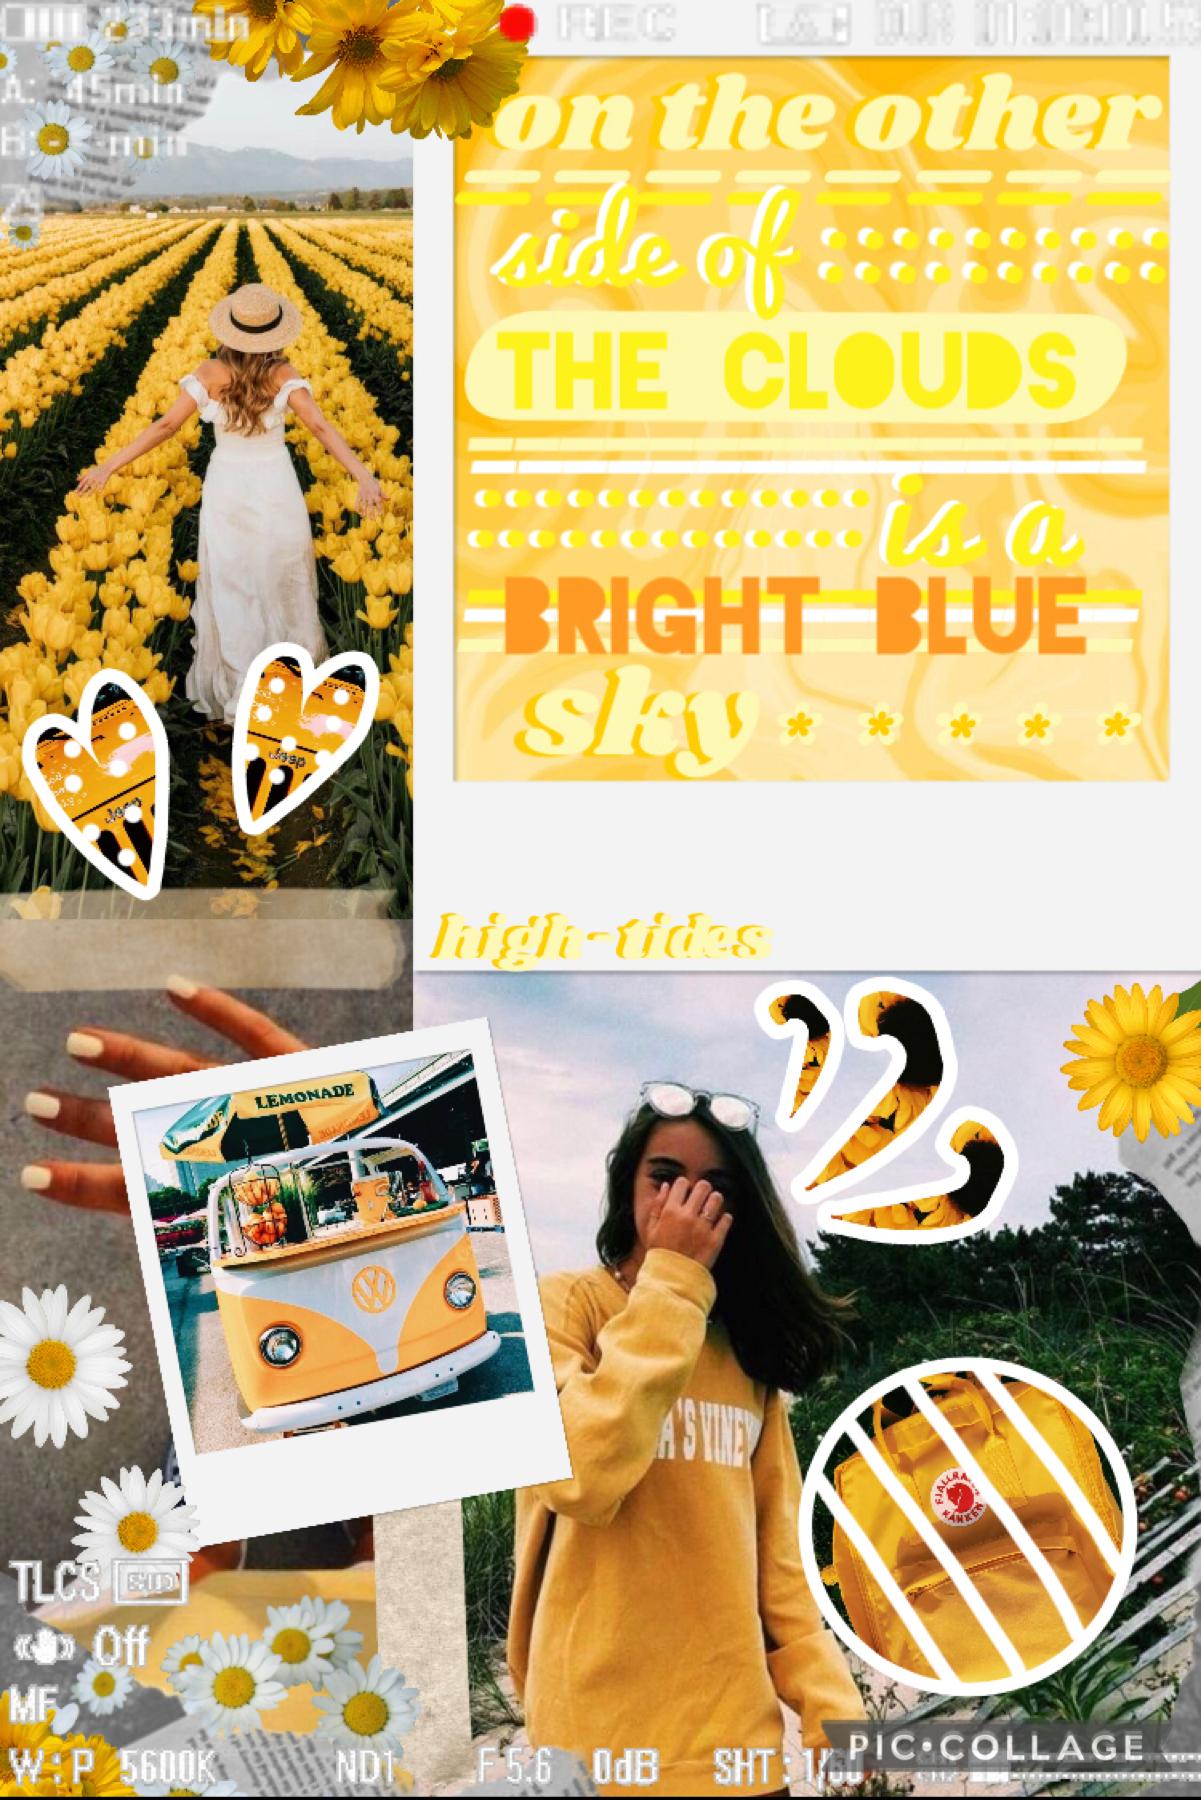 🌻 T A P 🌻
first post of my new theme! It’s very simple and colorful 🤩 I really like it since it’s faster to make compared to my collages in @daylight- QOTD: fav flower? AOTD: sunflowers and hydrangeas! 
7/21/22